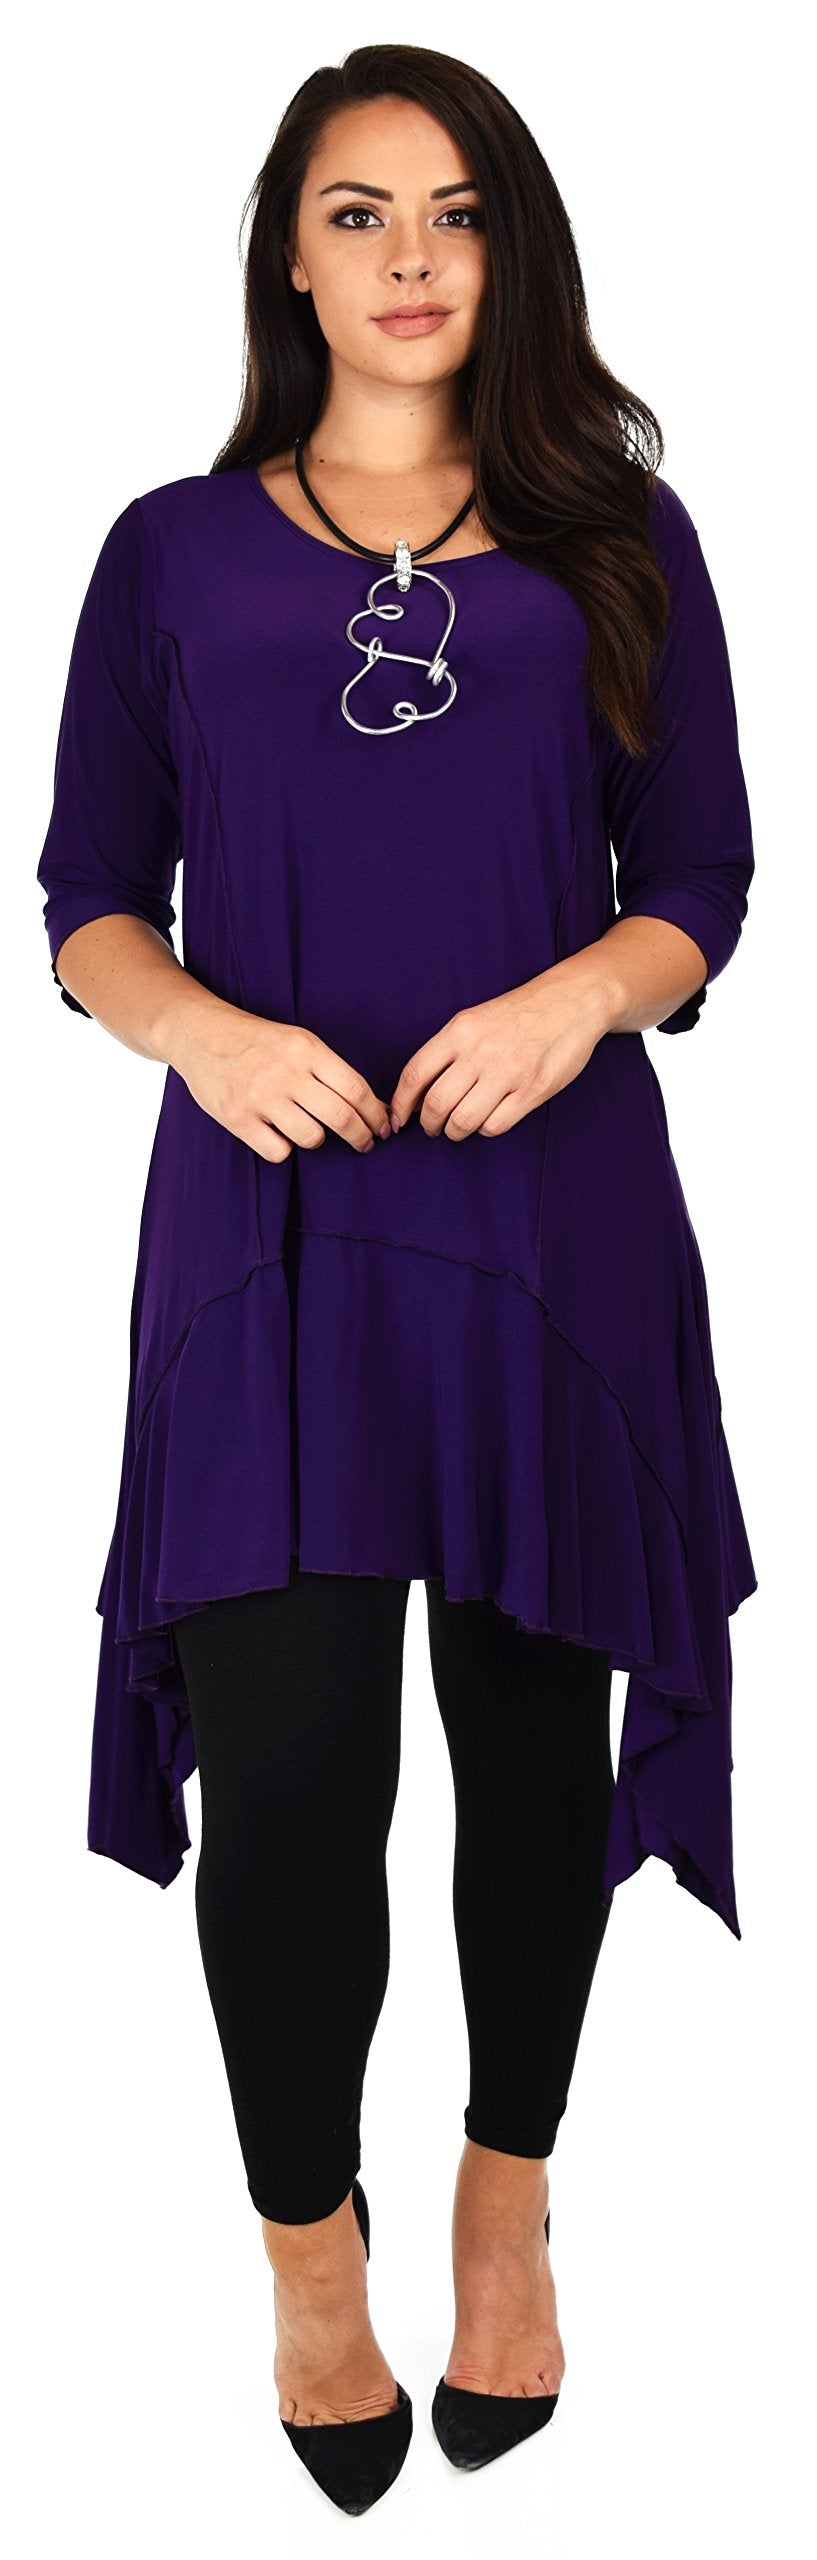 Stylish N Exclusive Crazy cuts Tunic,  Lagenlook Tunic dress, Plus Size Tunic, Quirky Tunic Dress. Plus size clothing